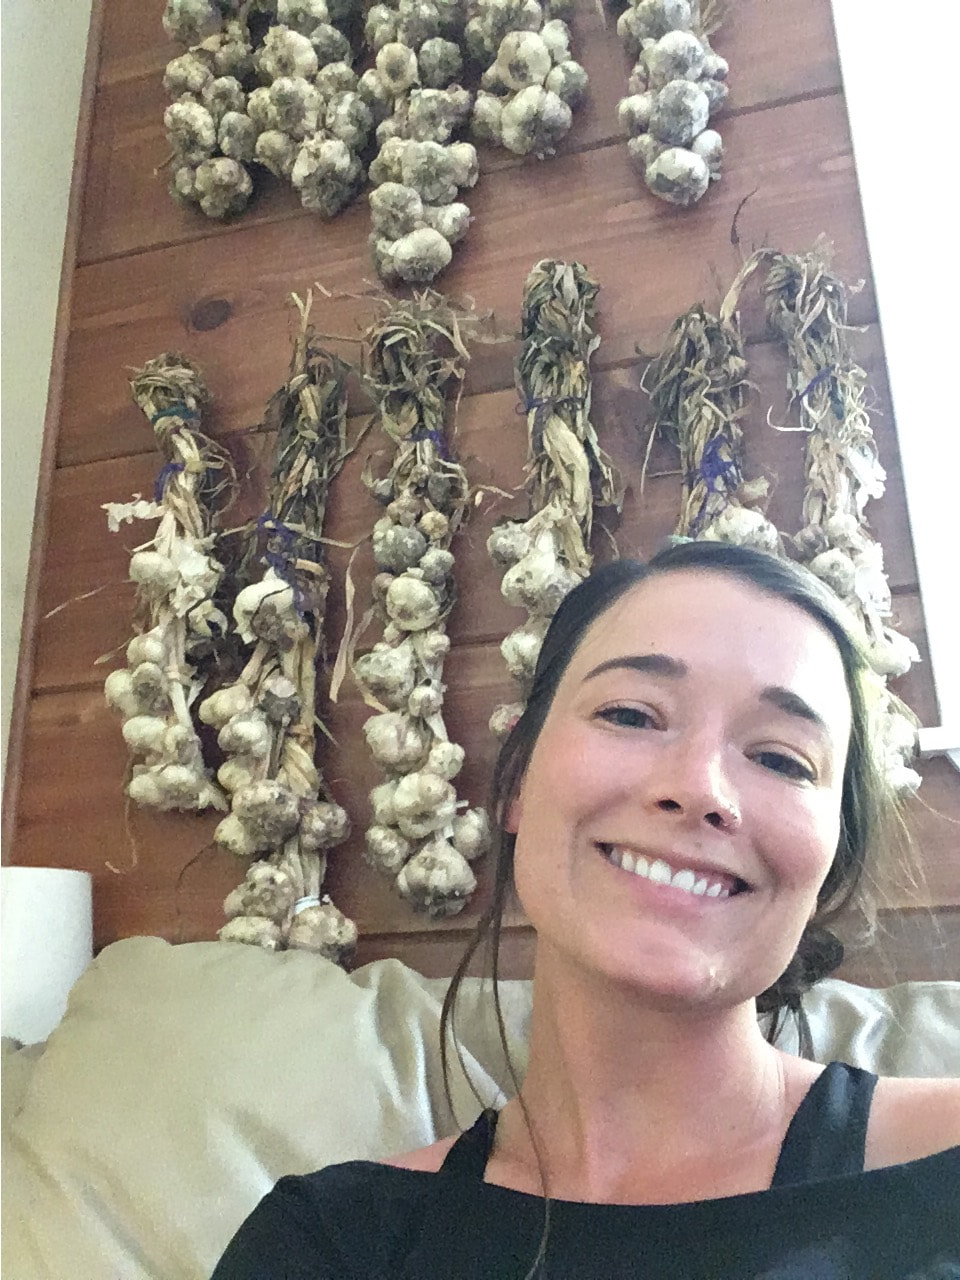 A picture of Ms. Allie at home posing with her garlic harvest.